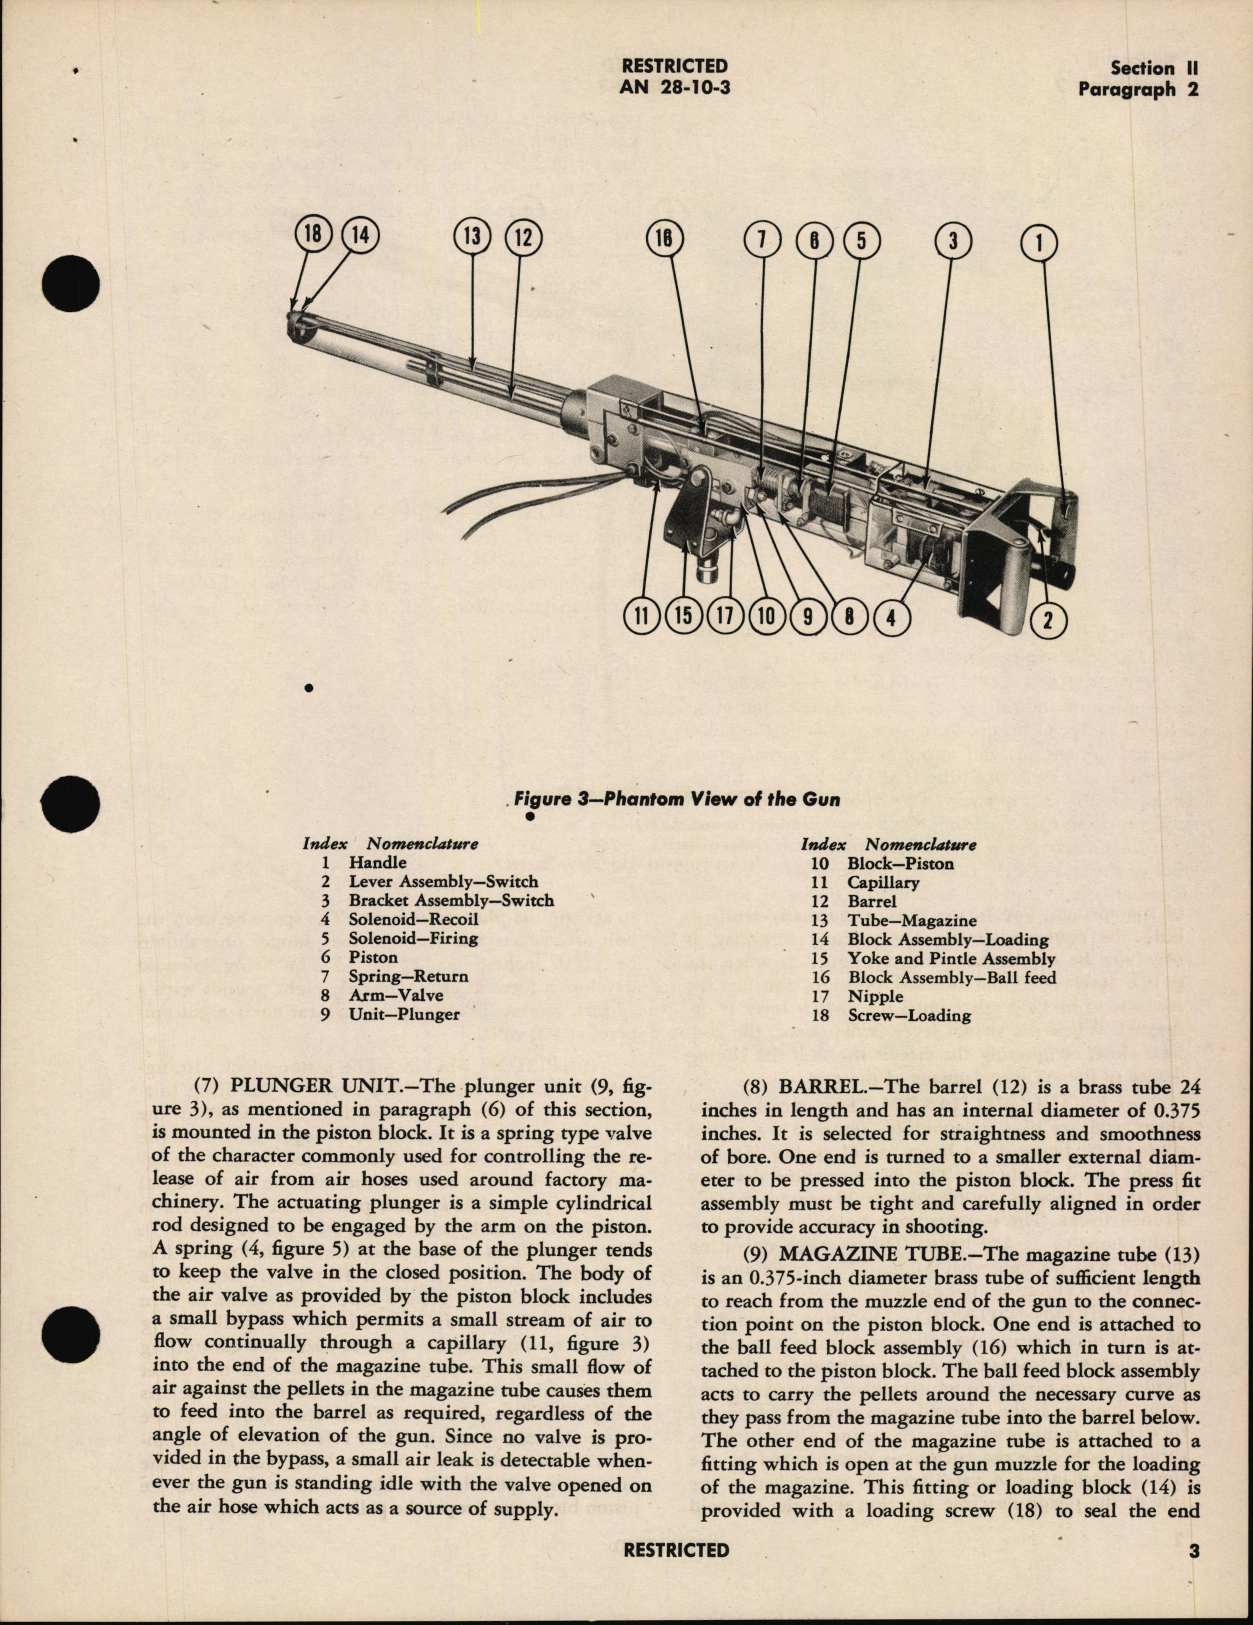 Sample page 7 from AirCorps Library document: Handbook of Instructions with Parts Catalog for Aerial Gunnery trainer Type E-11